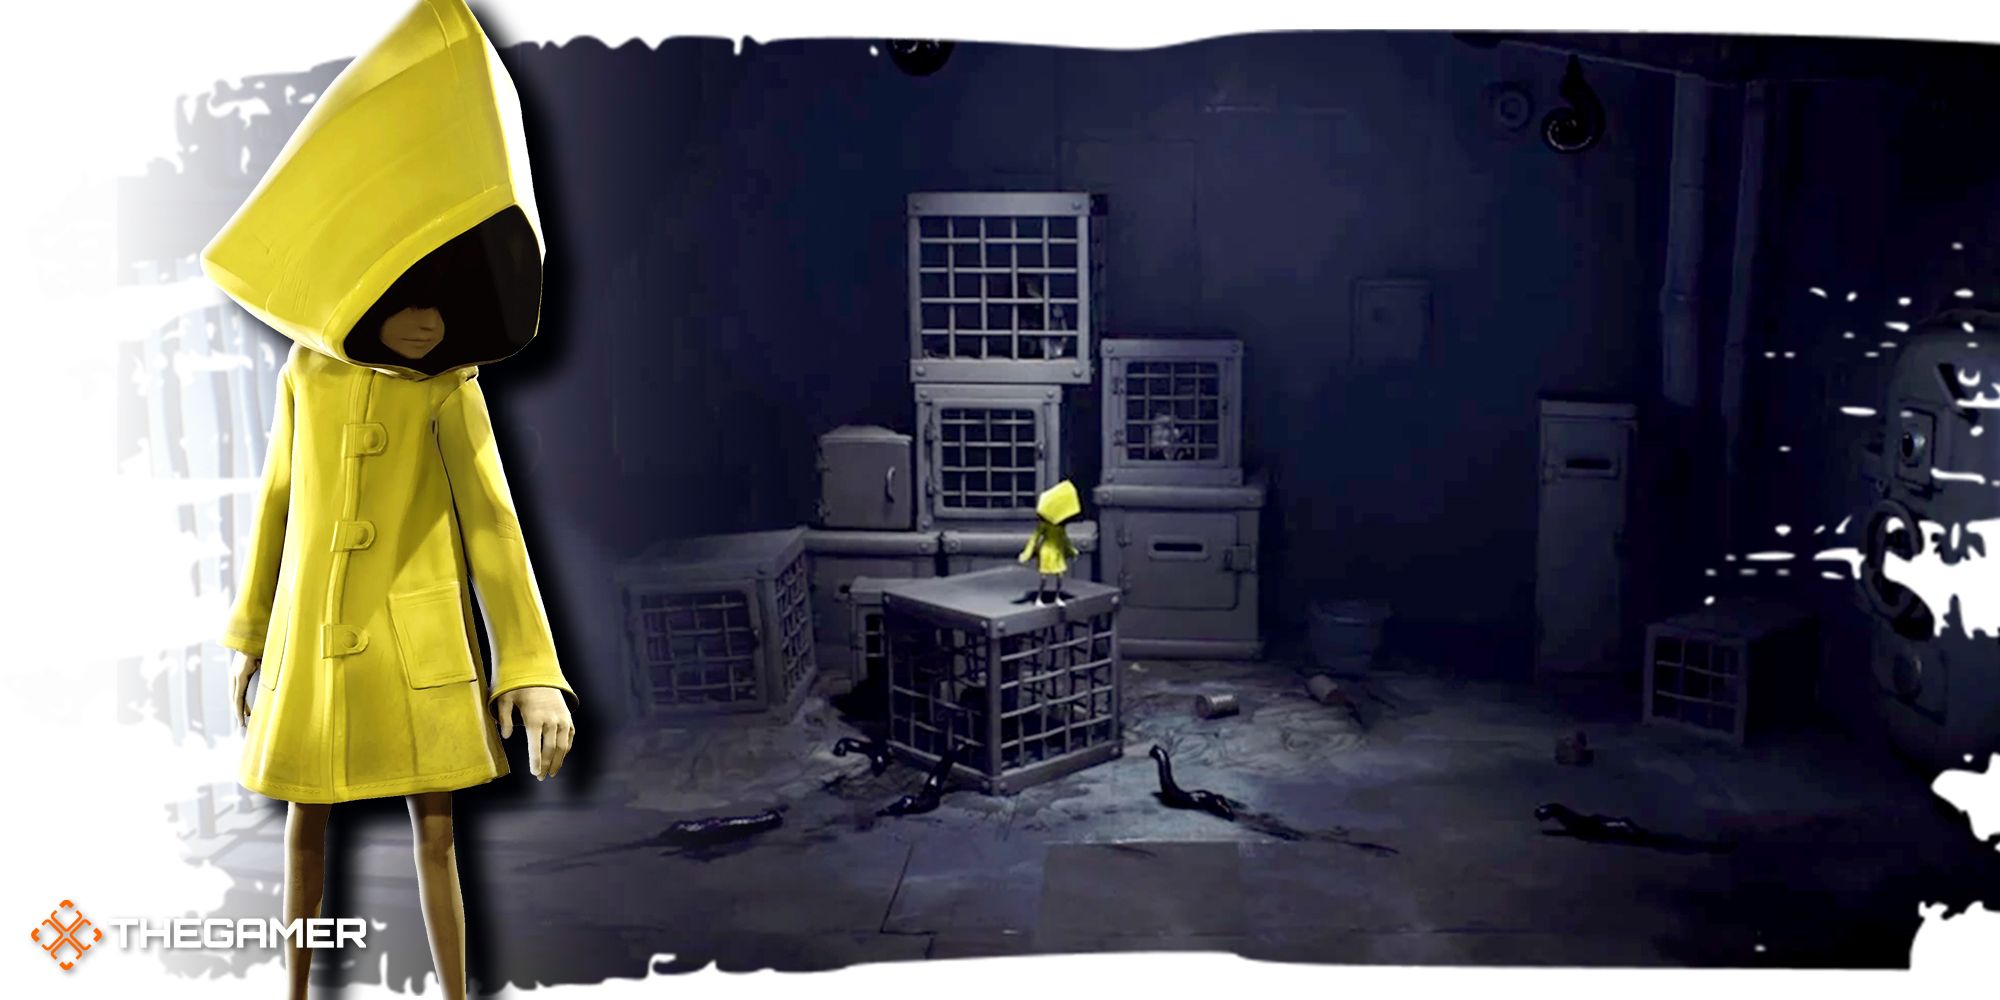 GLOCO Gaming - Little Nightmares Part 1, The Prison. Video:   This game is really cute but creepy at the  same time. I was really anticipating this game because it reminded me